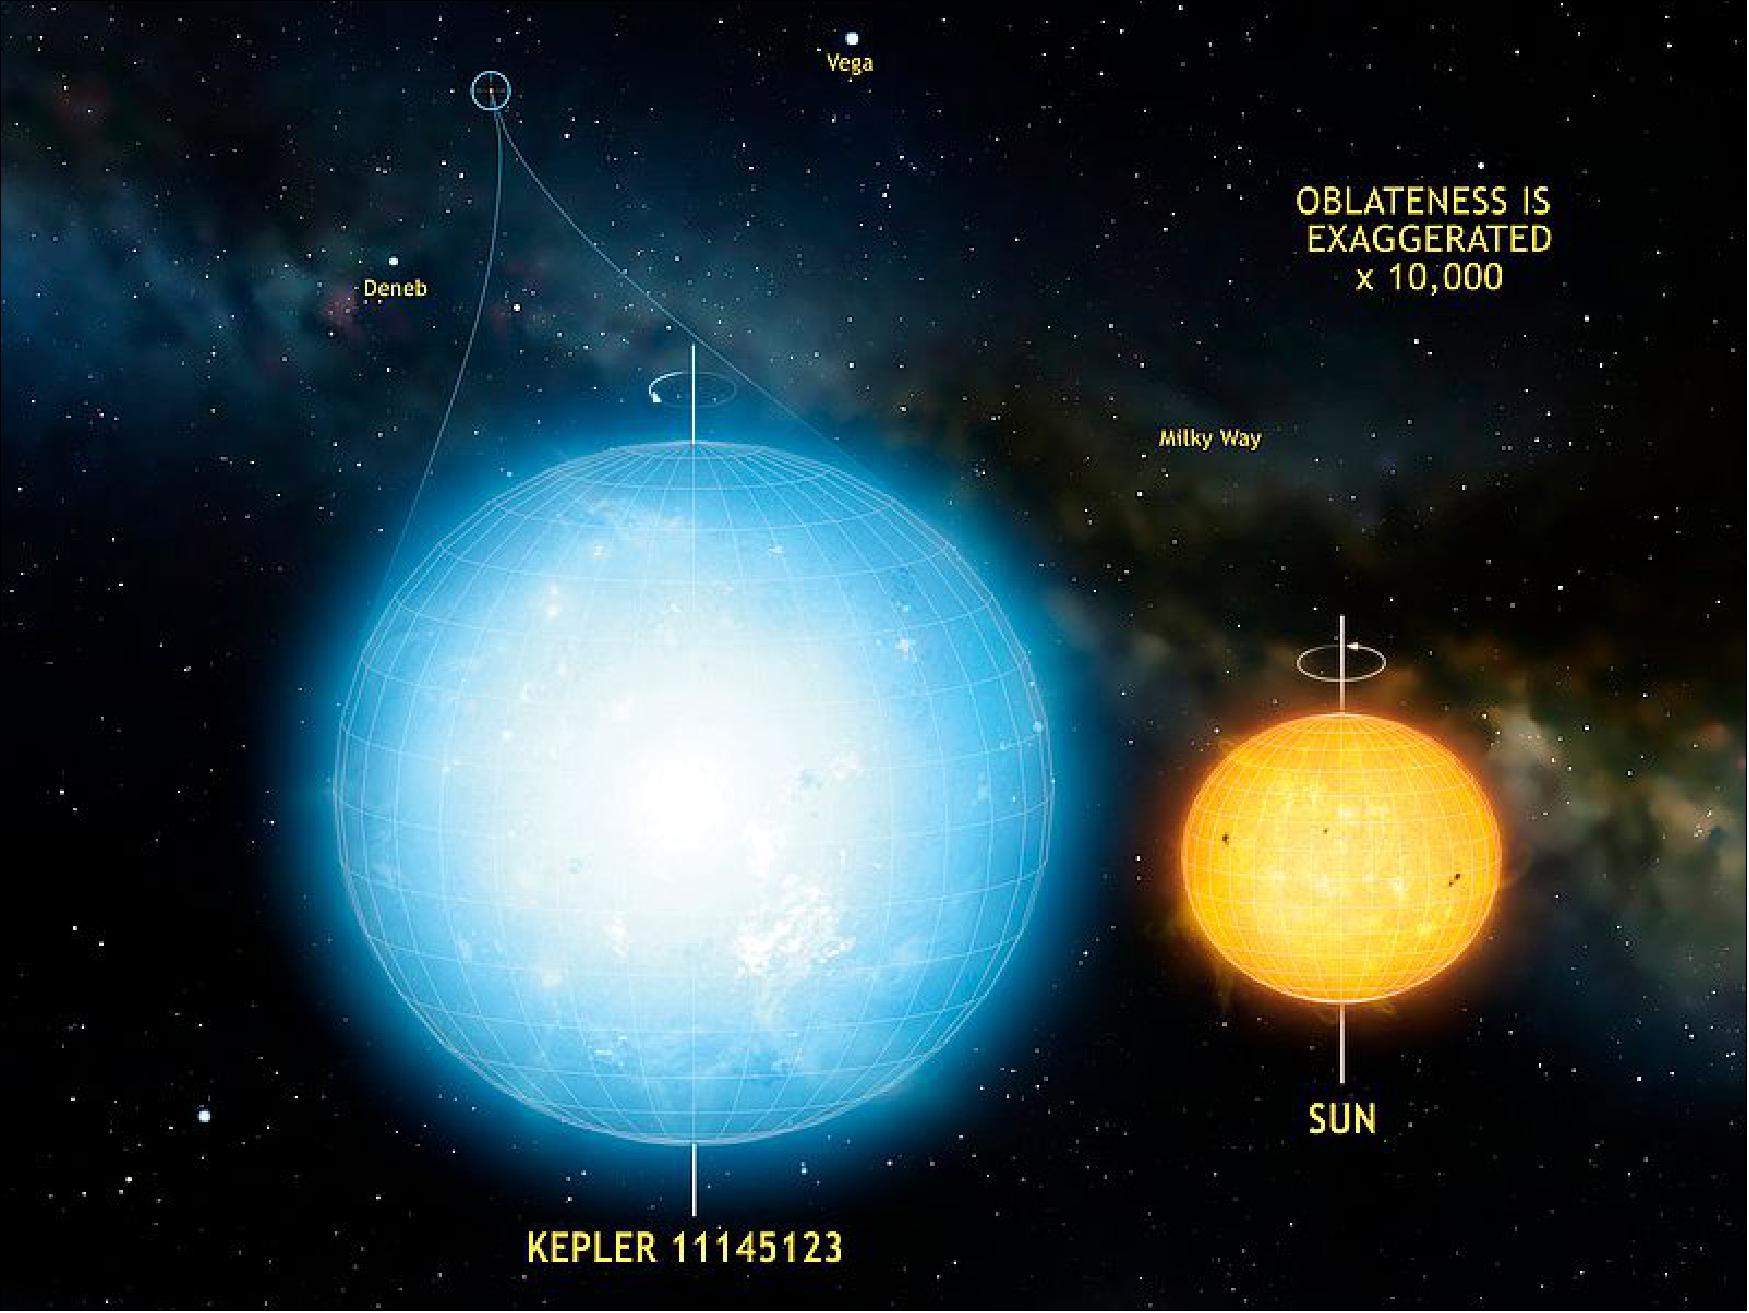 Figure 42: The star Kepler 11145123 is the roundest natural object ever measured in the universe. Stellar oscillations imply a difference in radius between the equator and the poles of only 3 km. This star is significantly more round than the Sun (image credit: MPS Göttingen, Mark A. Garlick)